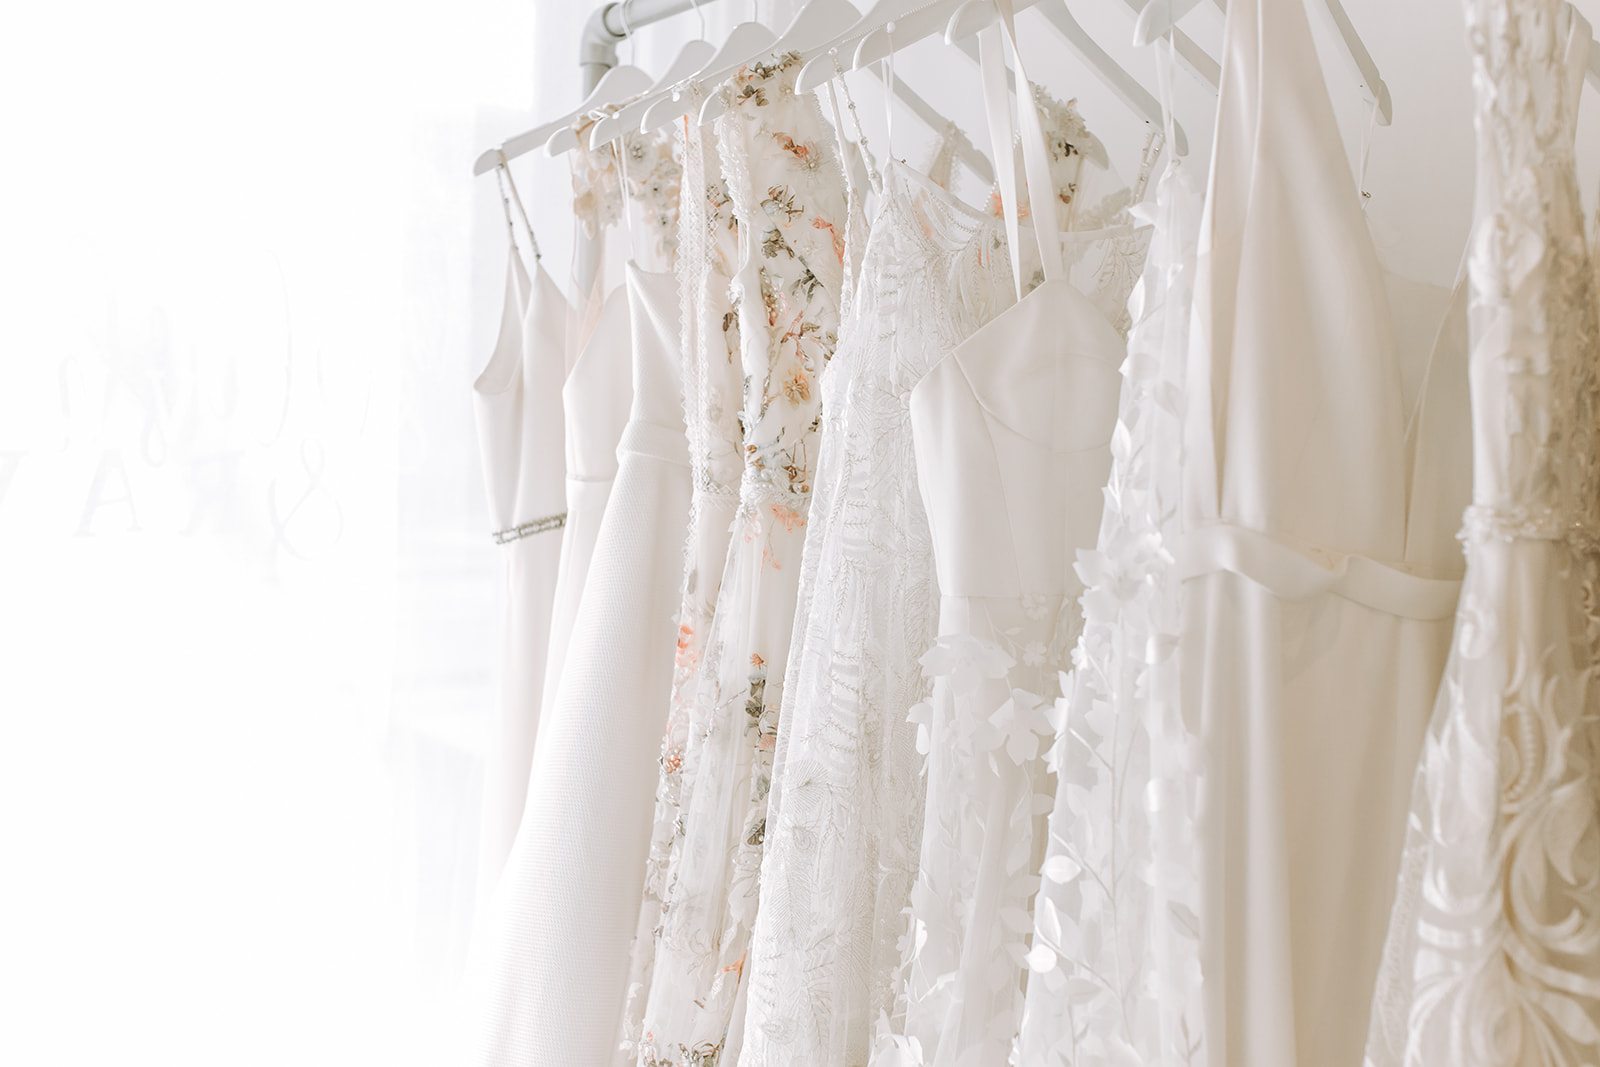 Everything You Need to Know About Wedding Dress Shopping: Q and A with Blush + Raven Bridal Boutique Featured by Brontë Bride